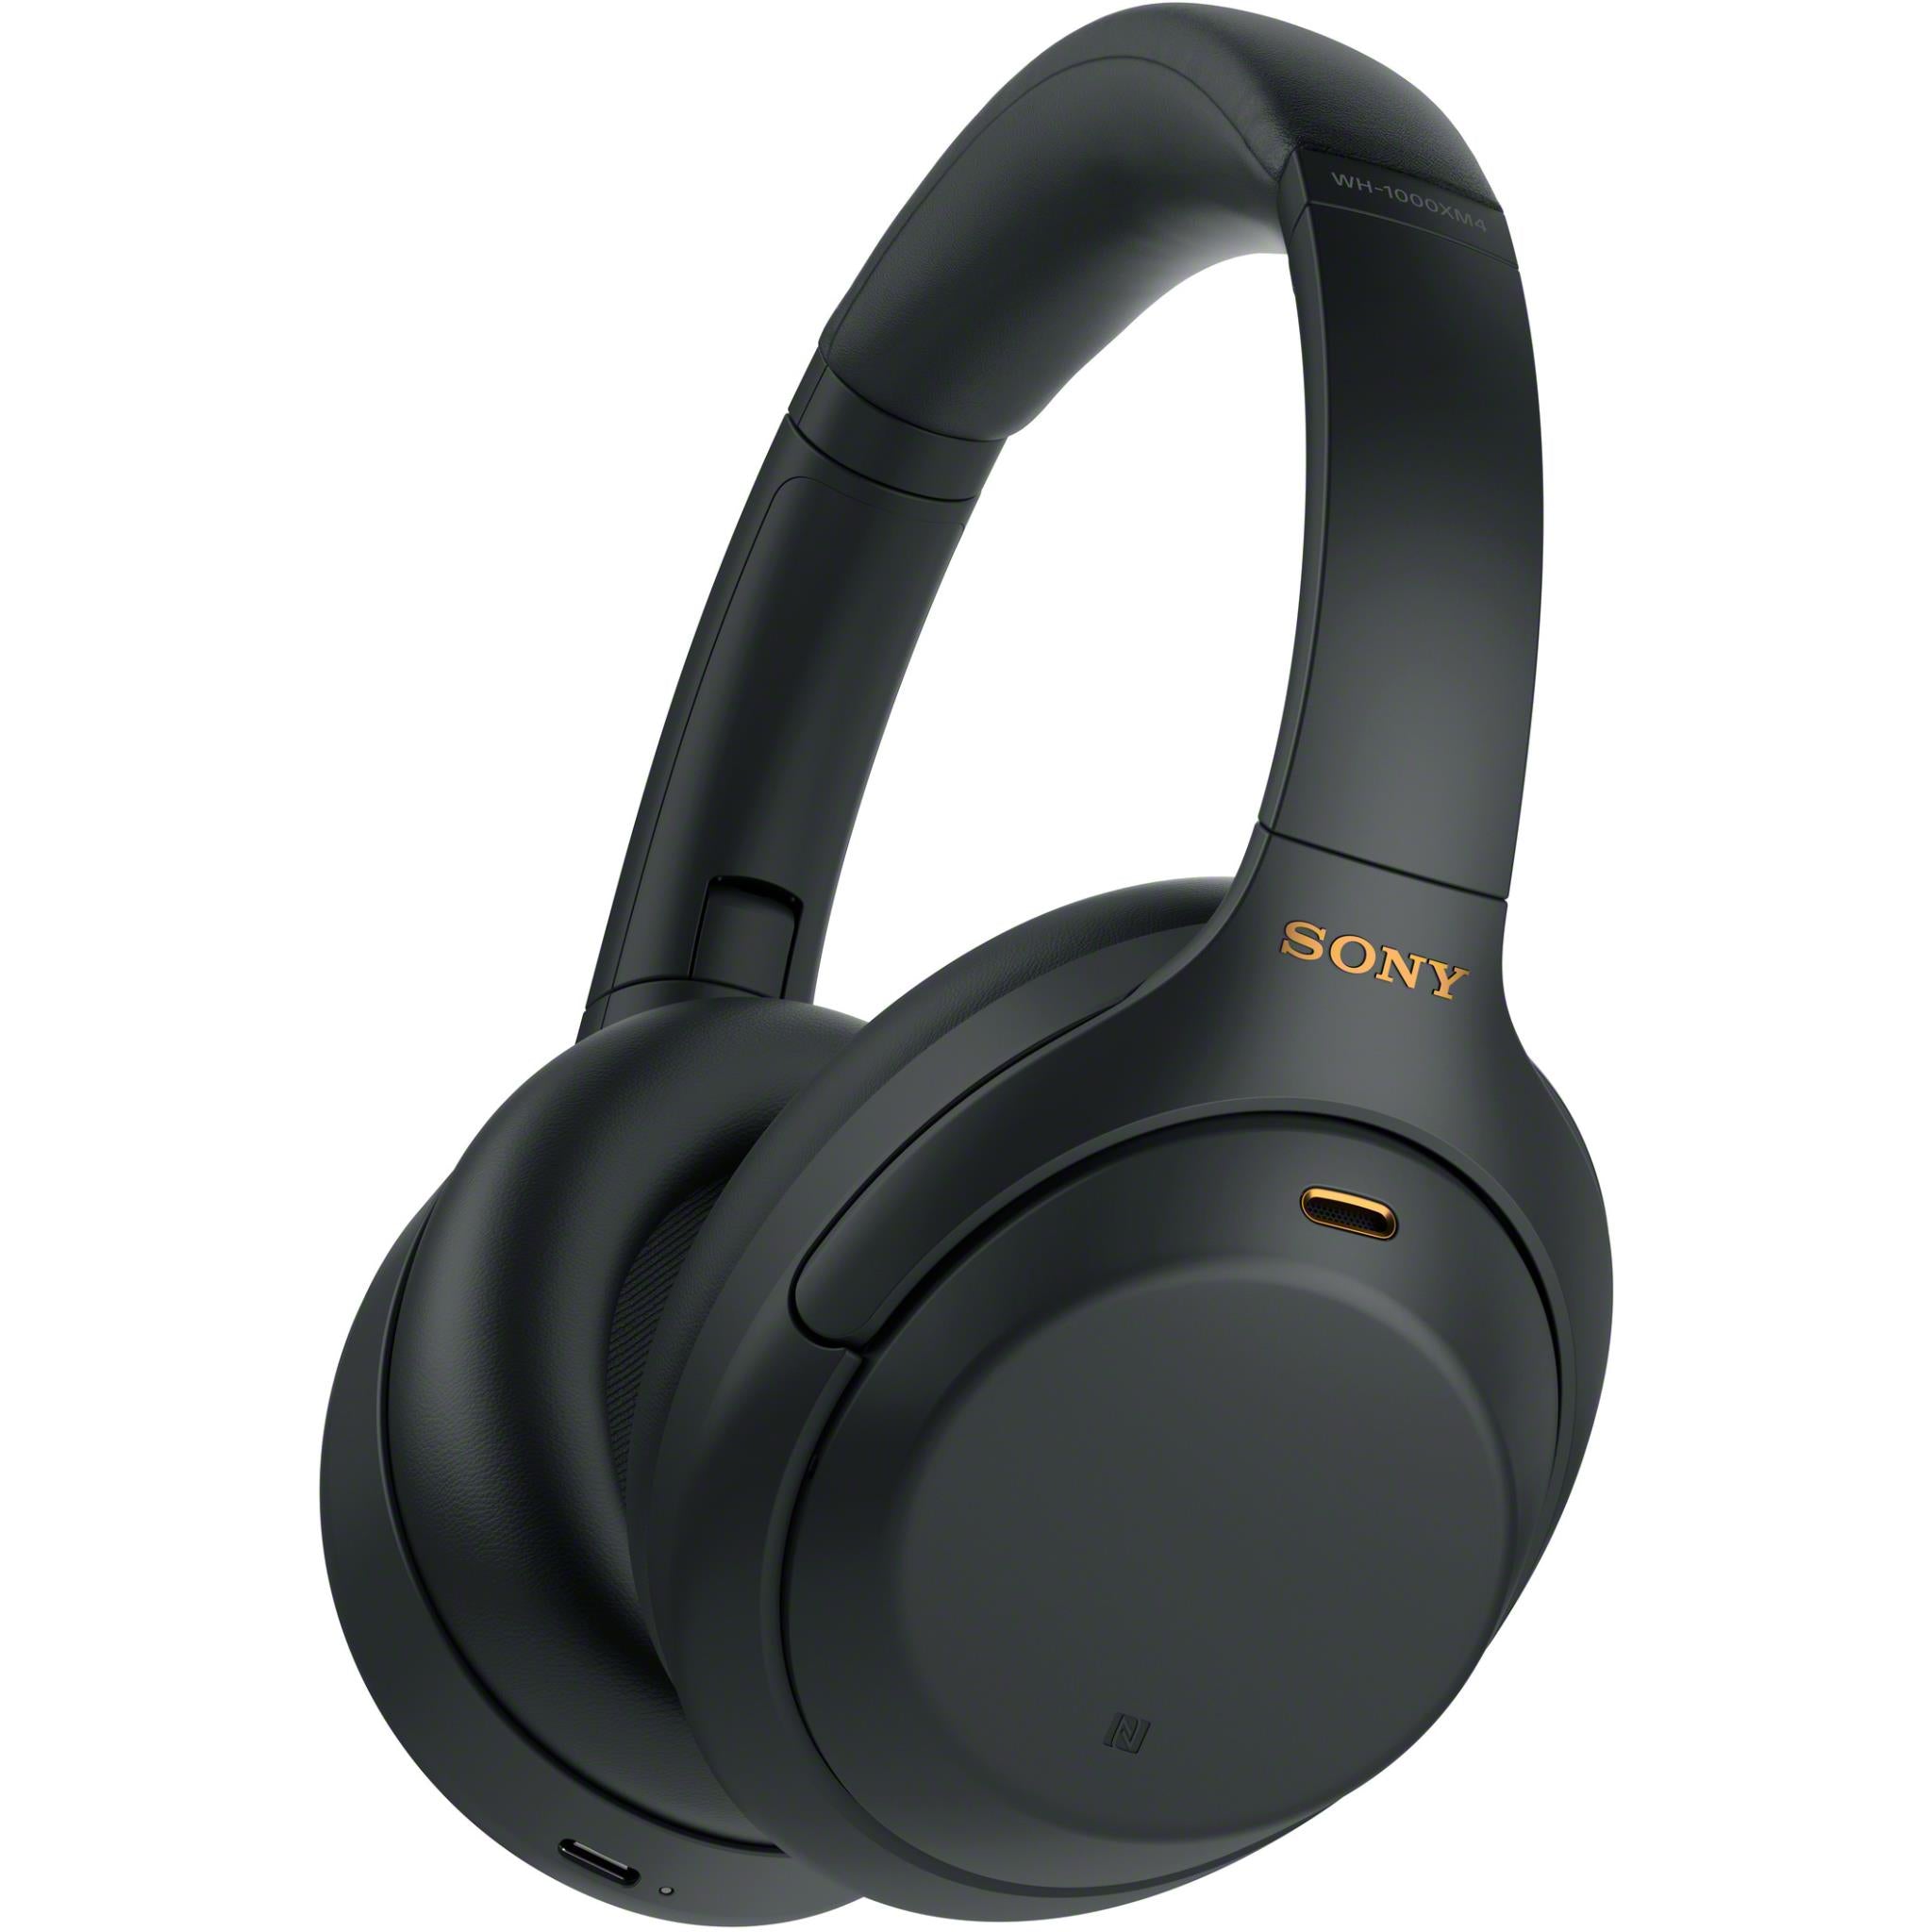 Sony WH-1000XM5 Wireless Industry Leading Noise Canceling Headphones